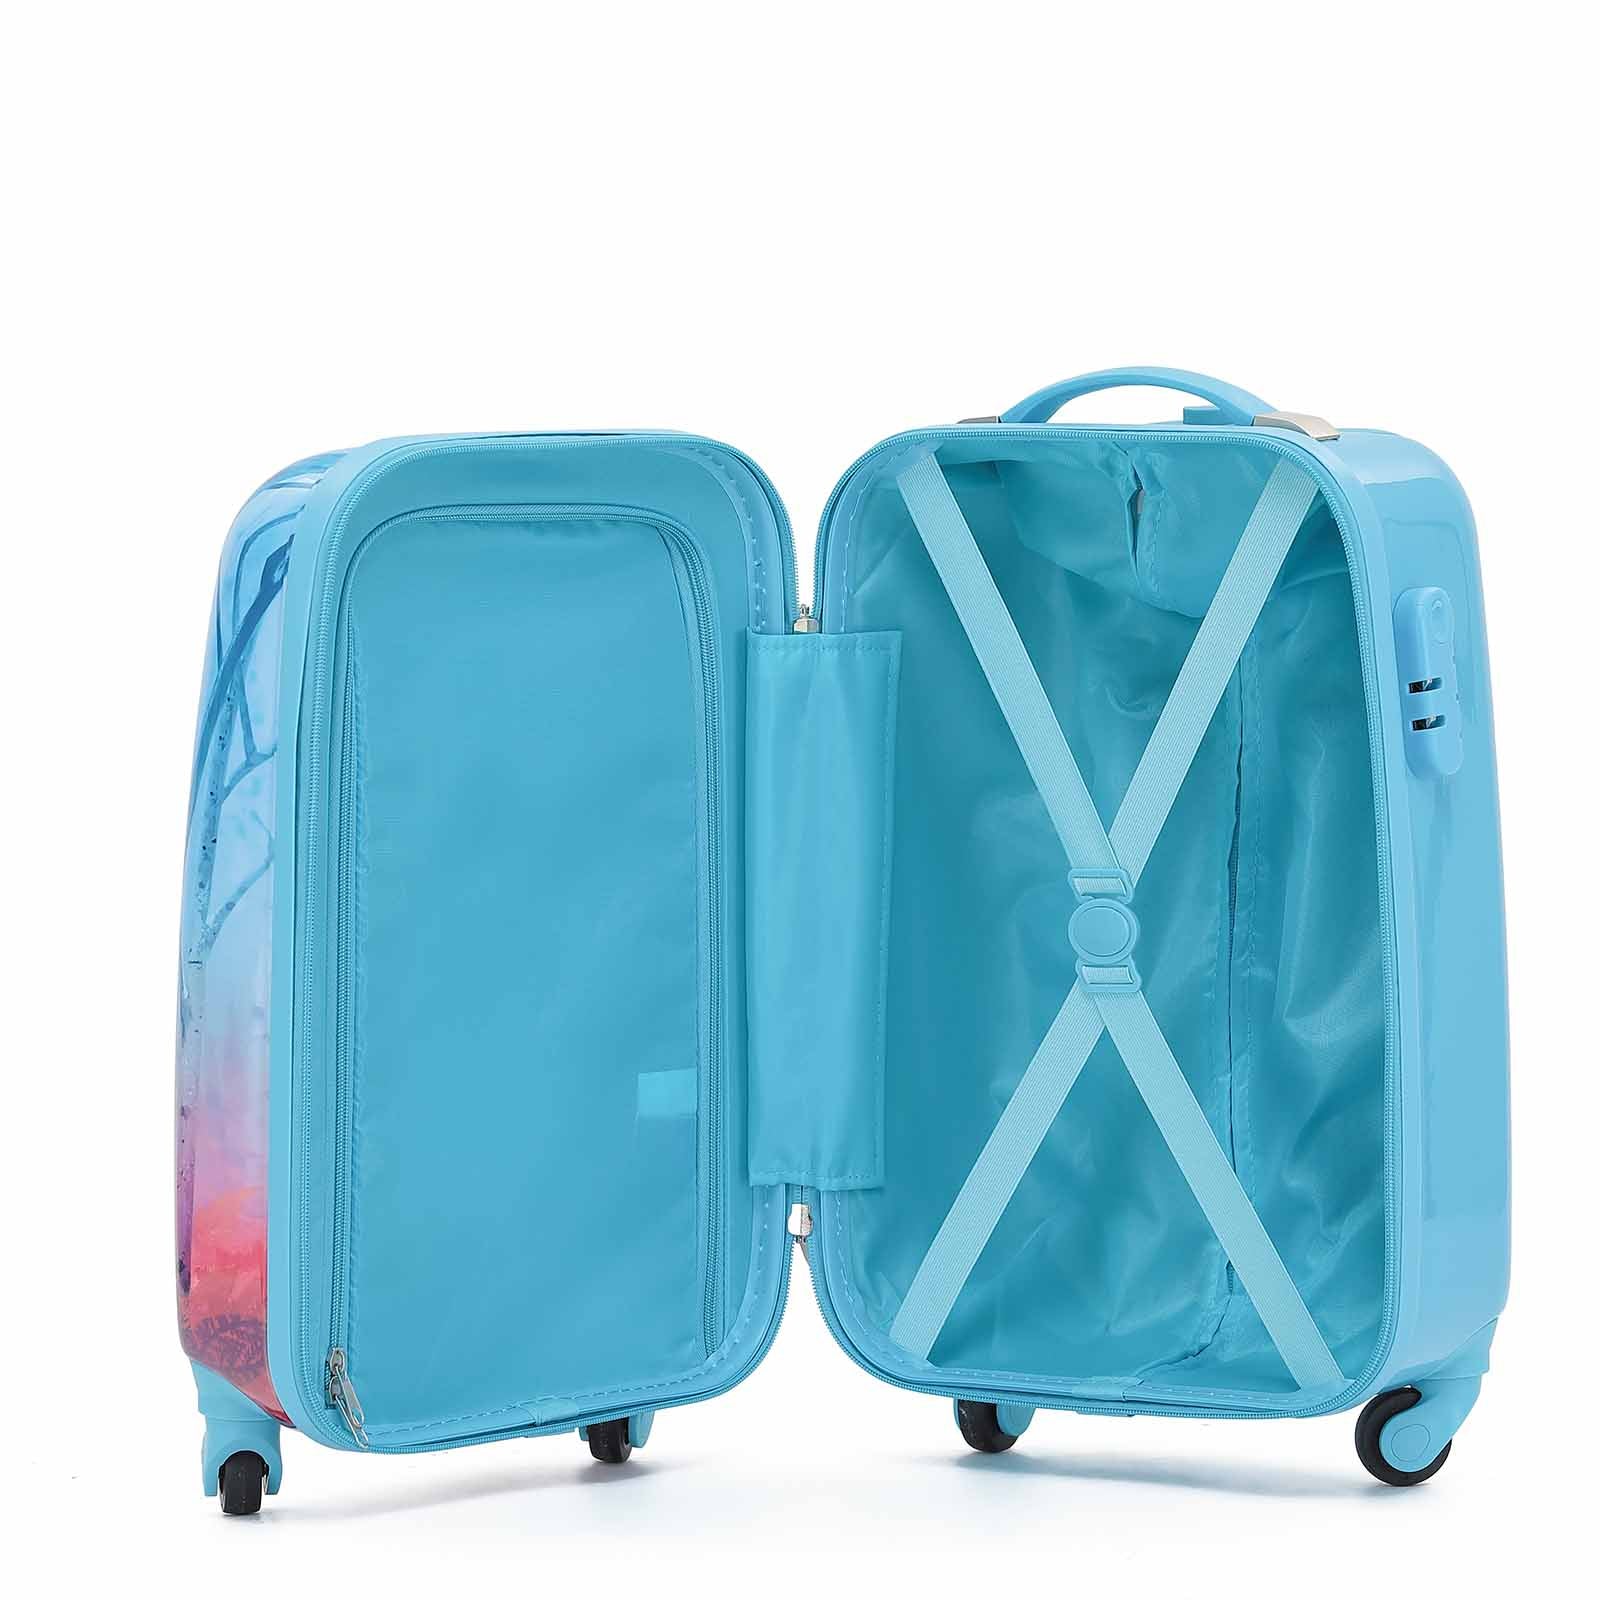 Disney Frozen 17 Inch Carry-On Suitcase